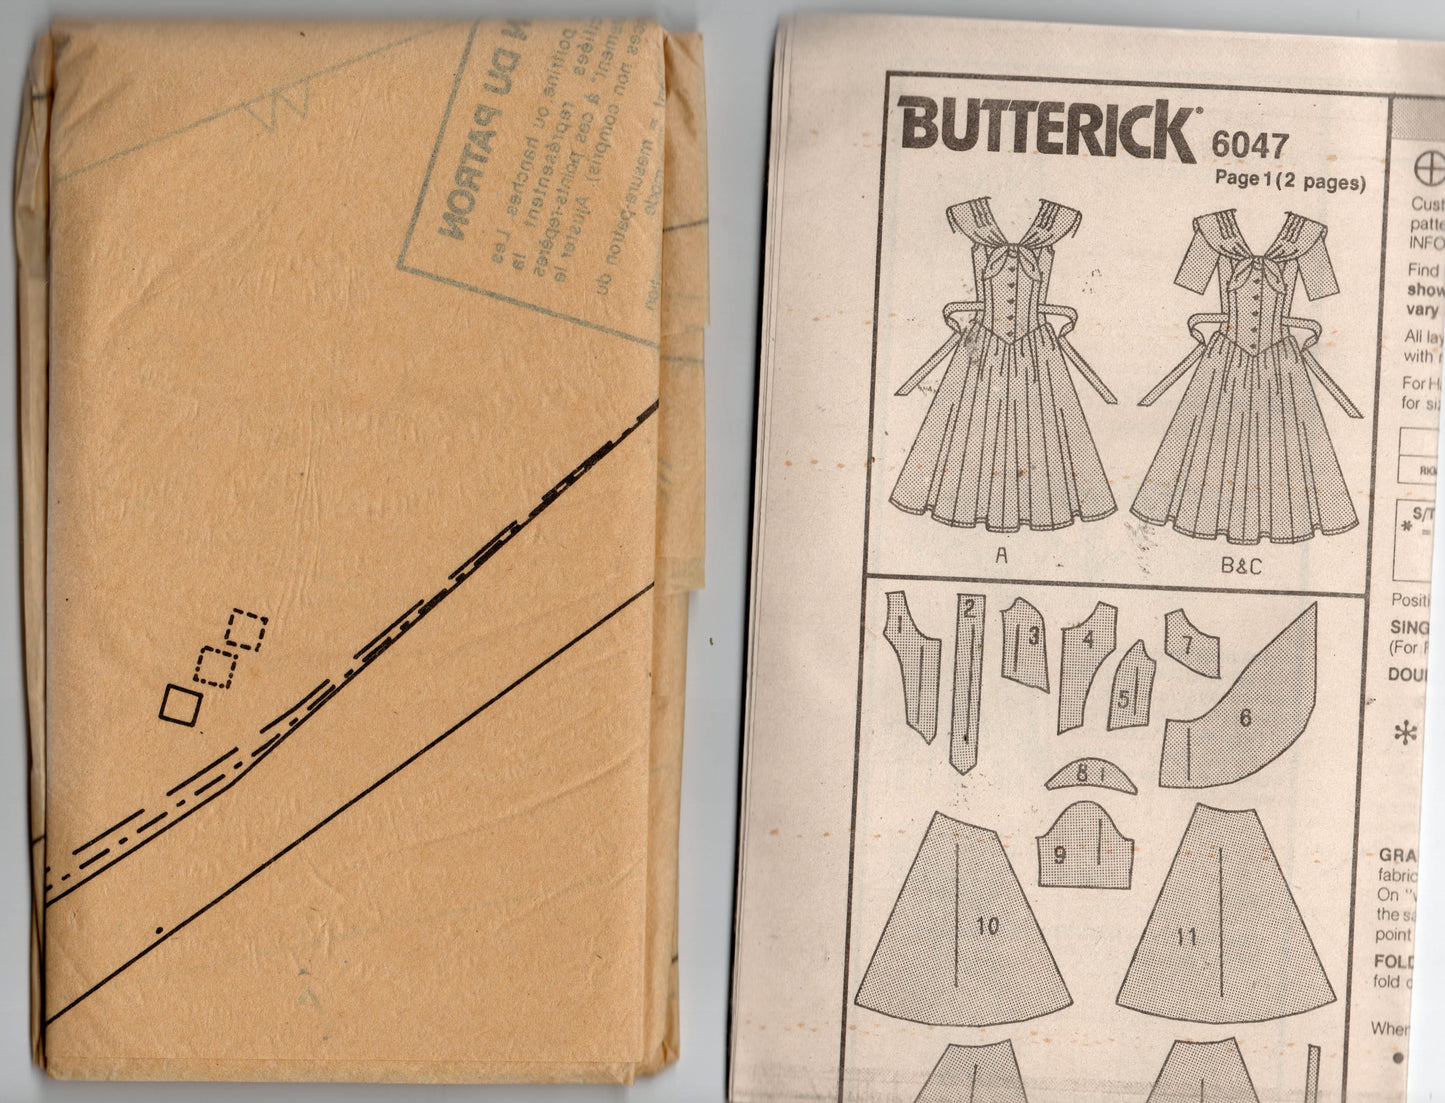 Butterick 6047 Womens Dropped Waist Dress with Attached Draped Collar 1990s Vintage Sewing Pattern Size 12 - 16 UNCUT Factory Folded